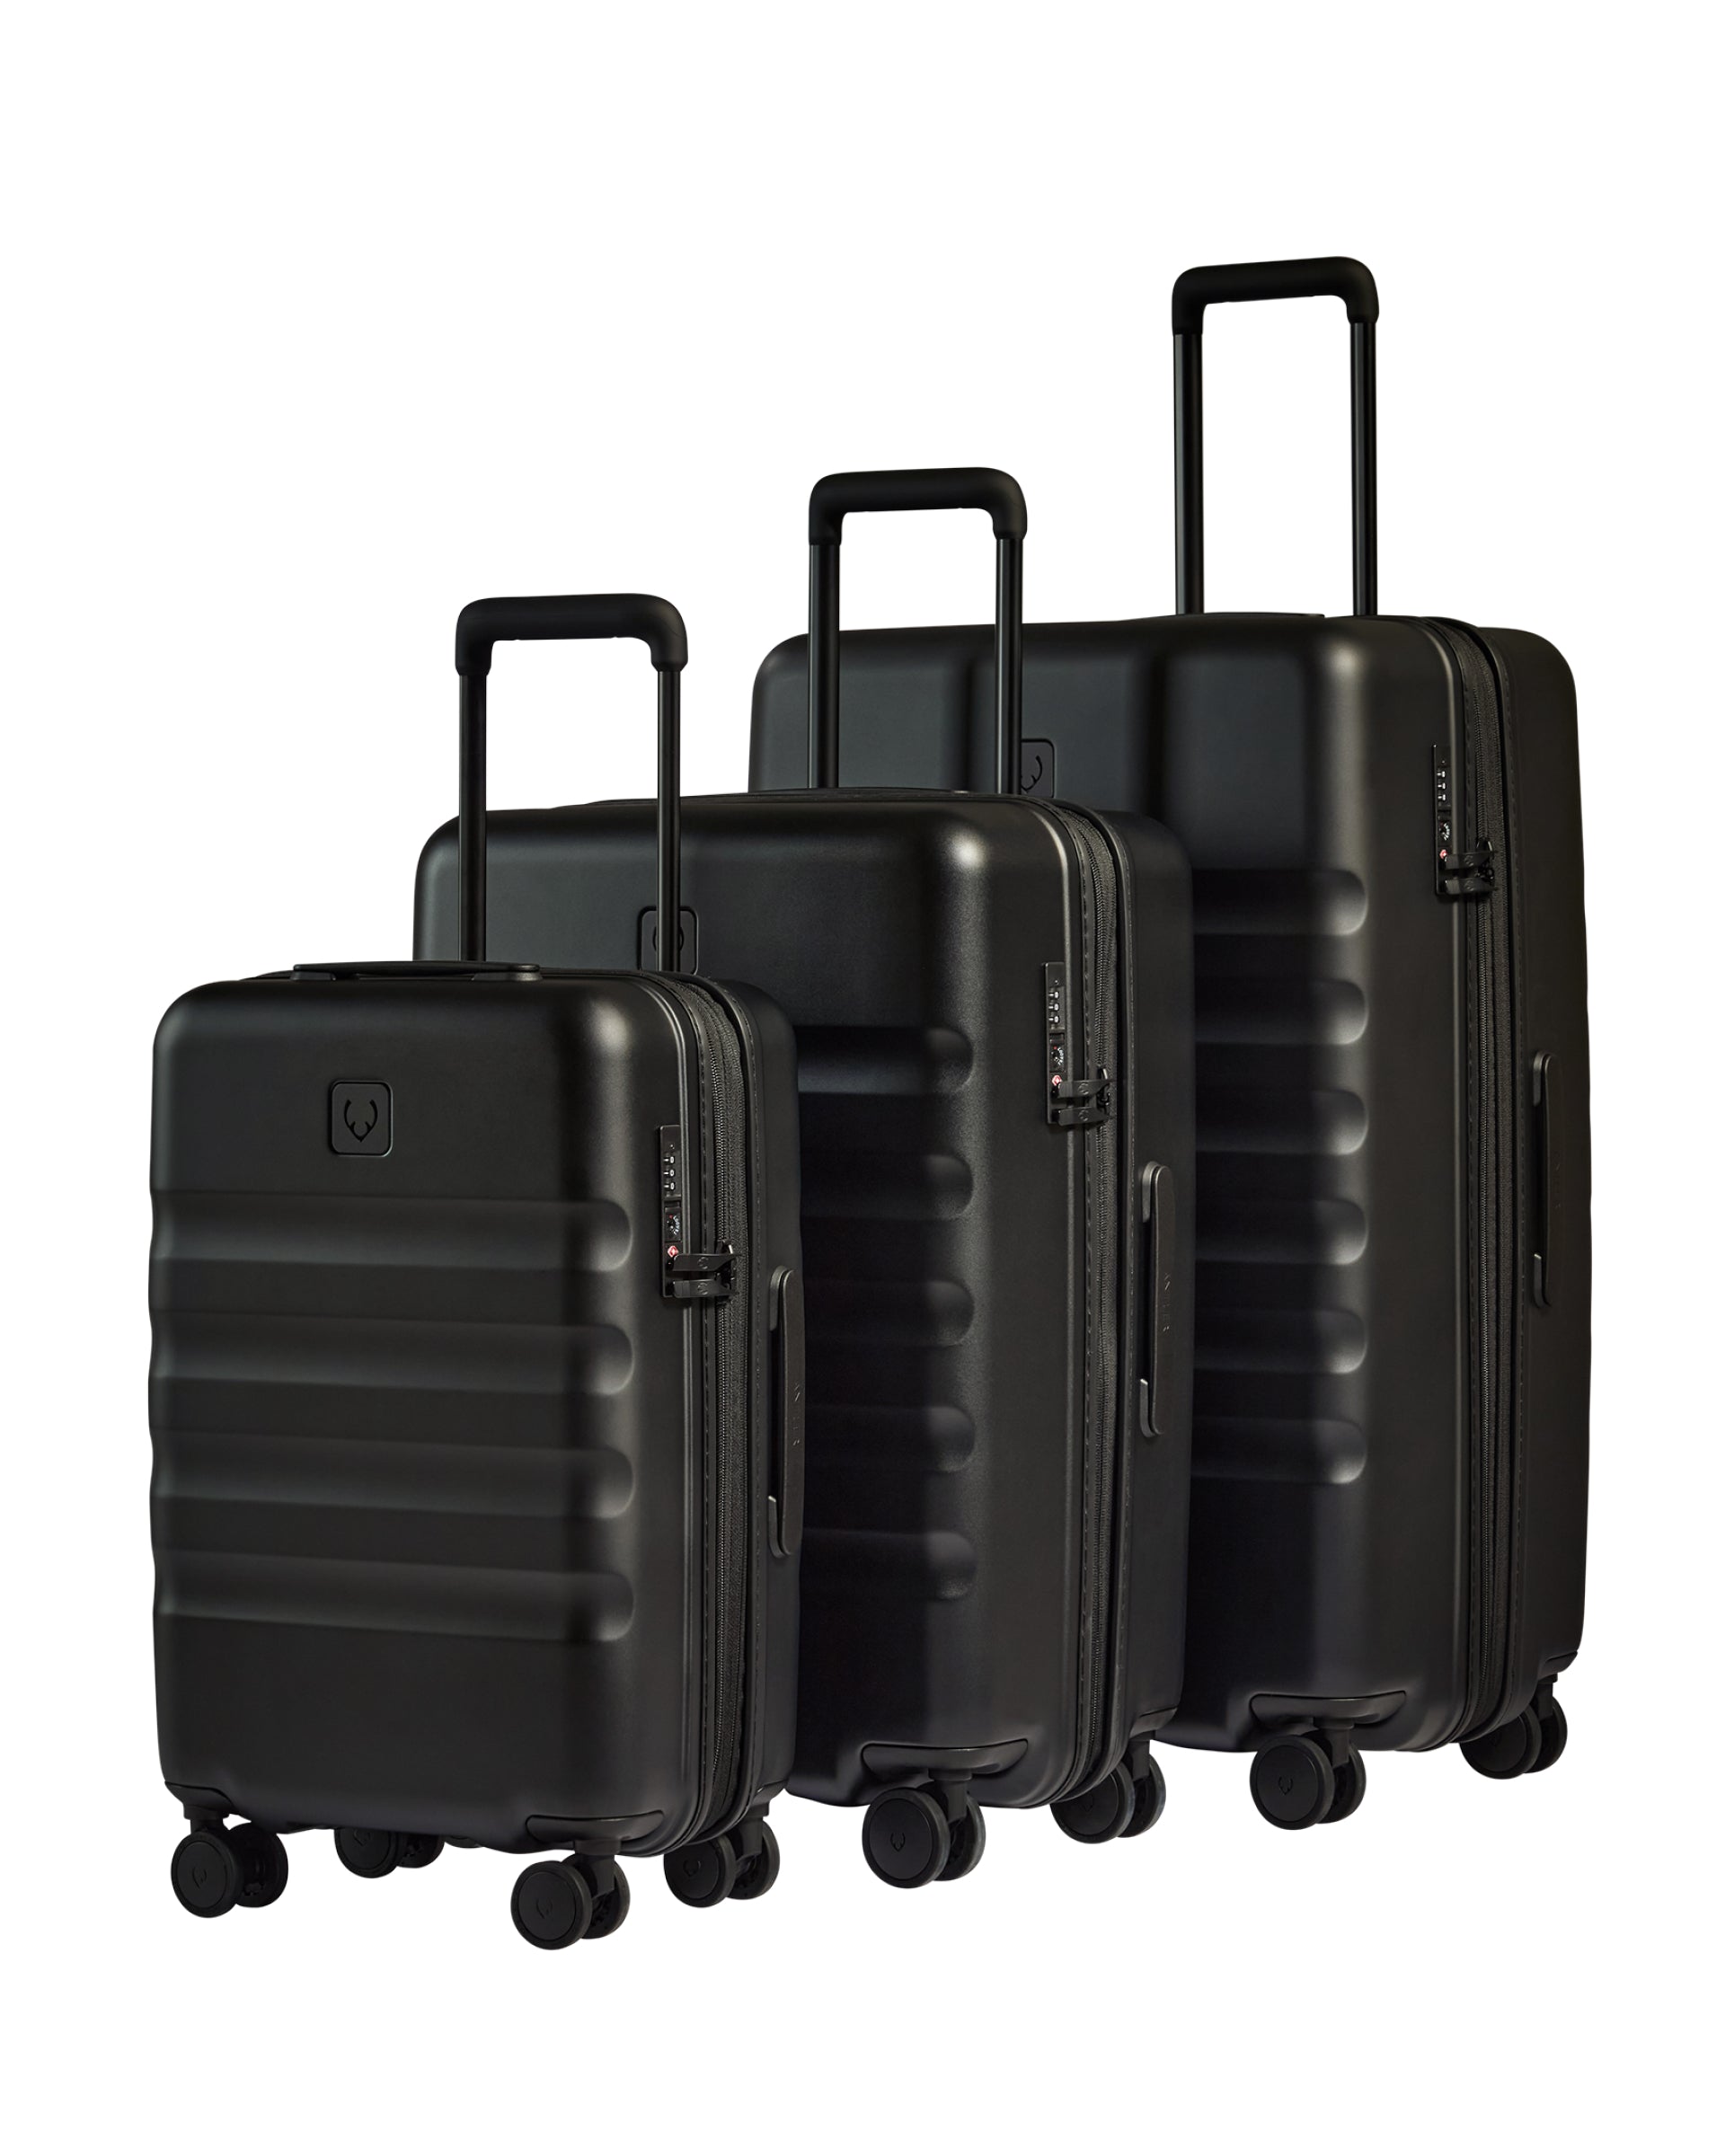 View Antler Icon Stripe Suitcase Set With Expander Cabin Suitcase In Black information